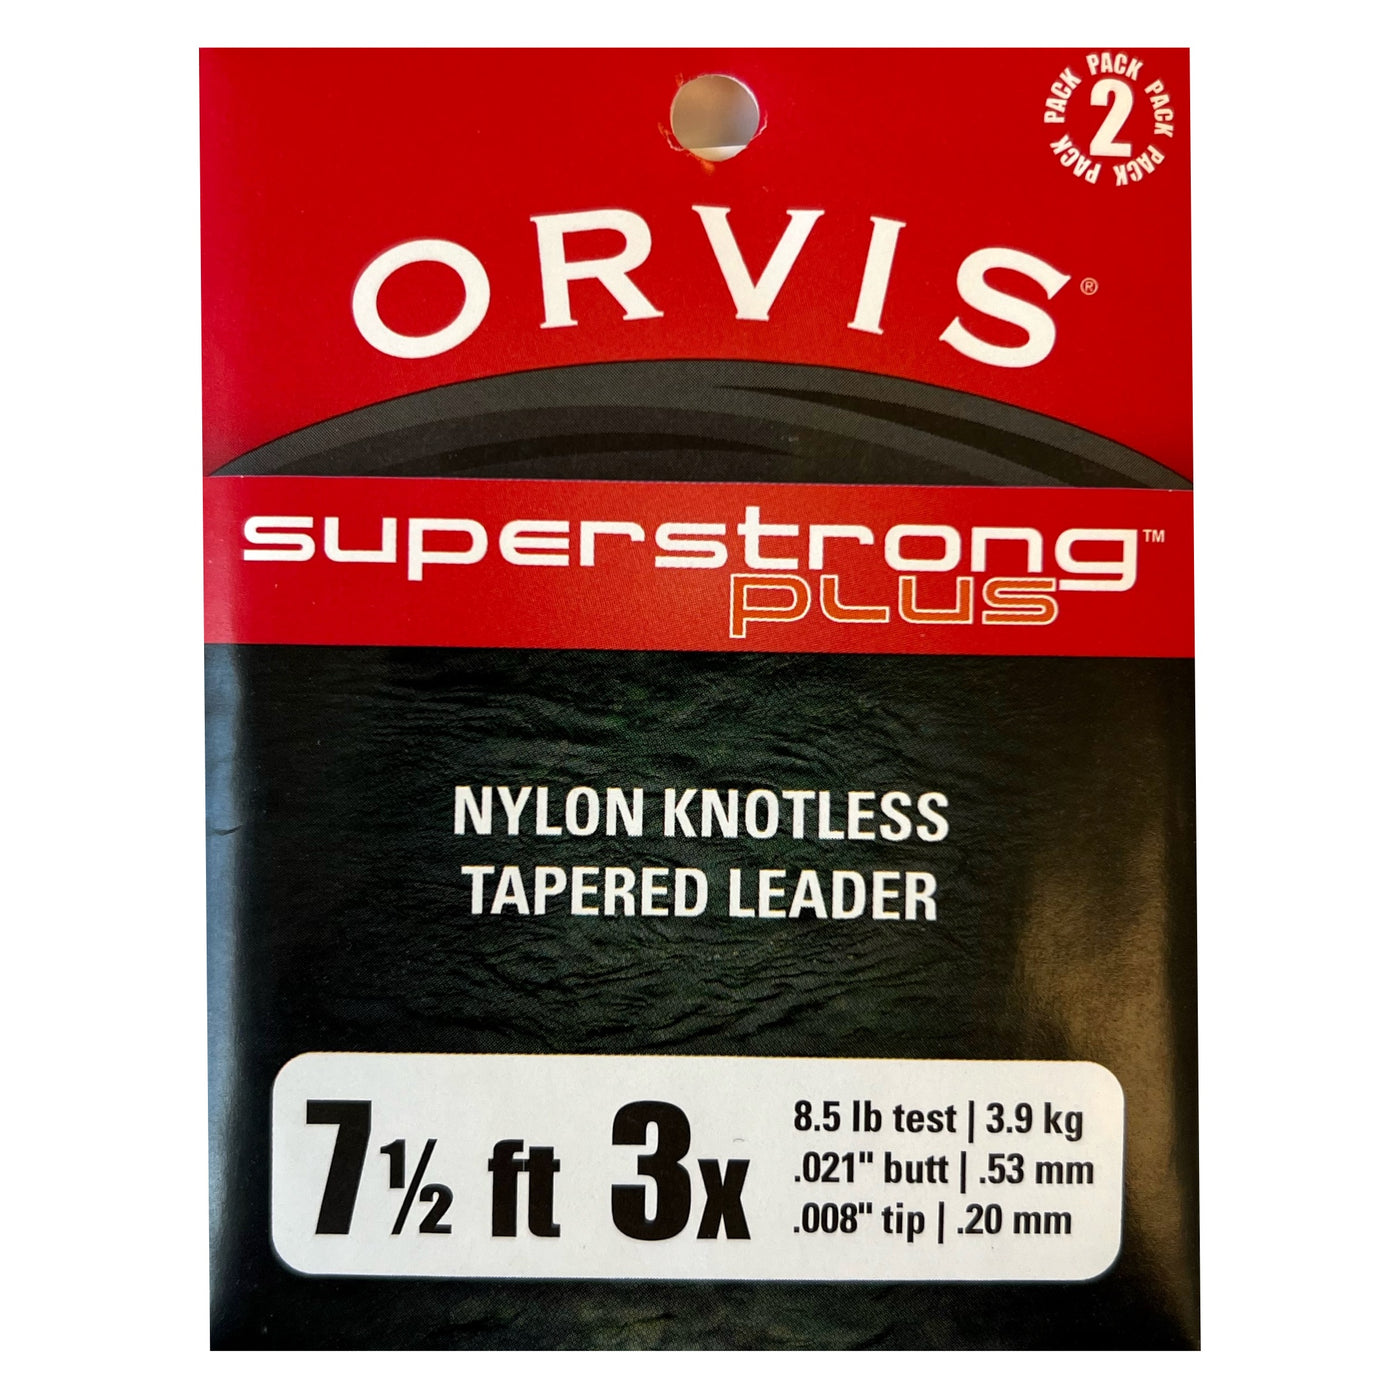 Orvis Superstrong Plus Leaders - 2 Pack - 7.5ft - 4X